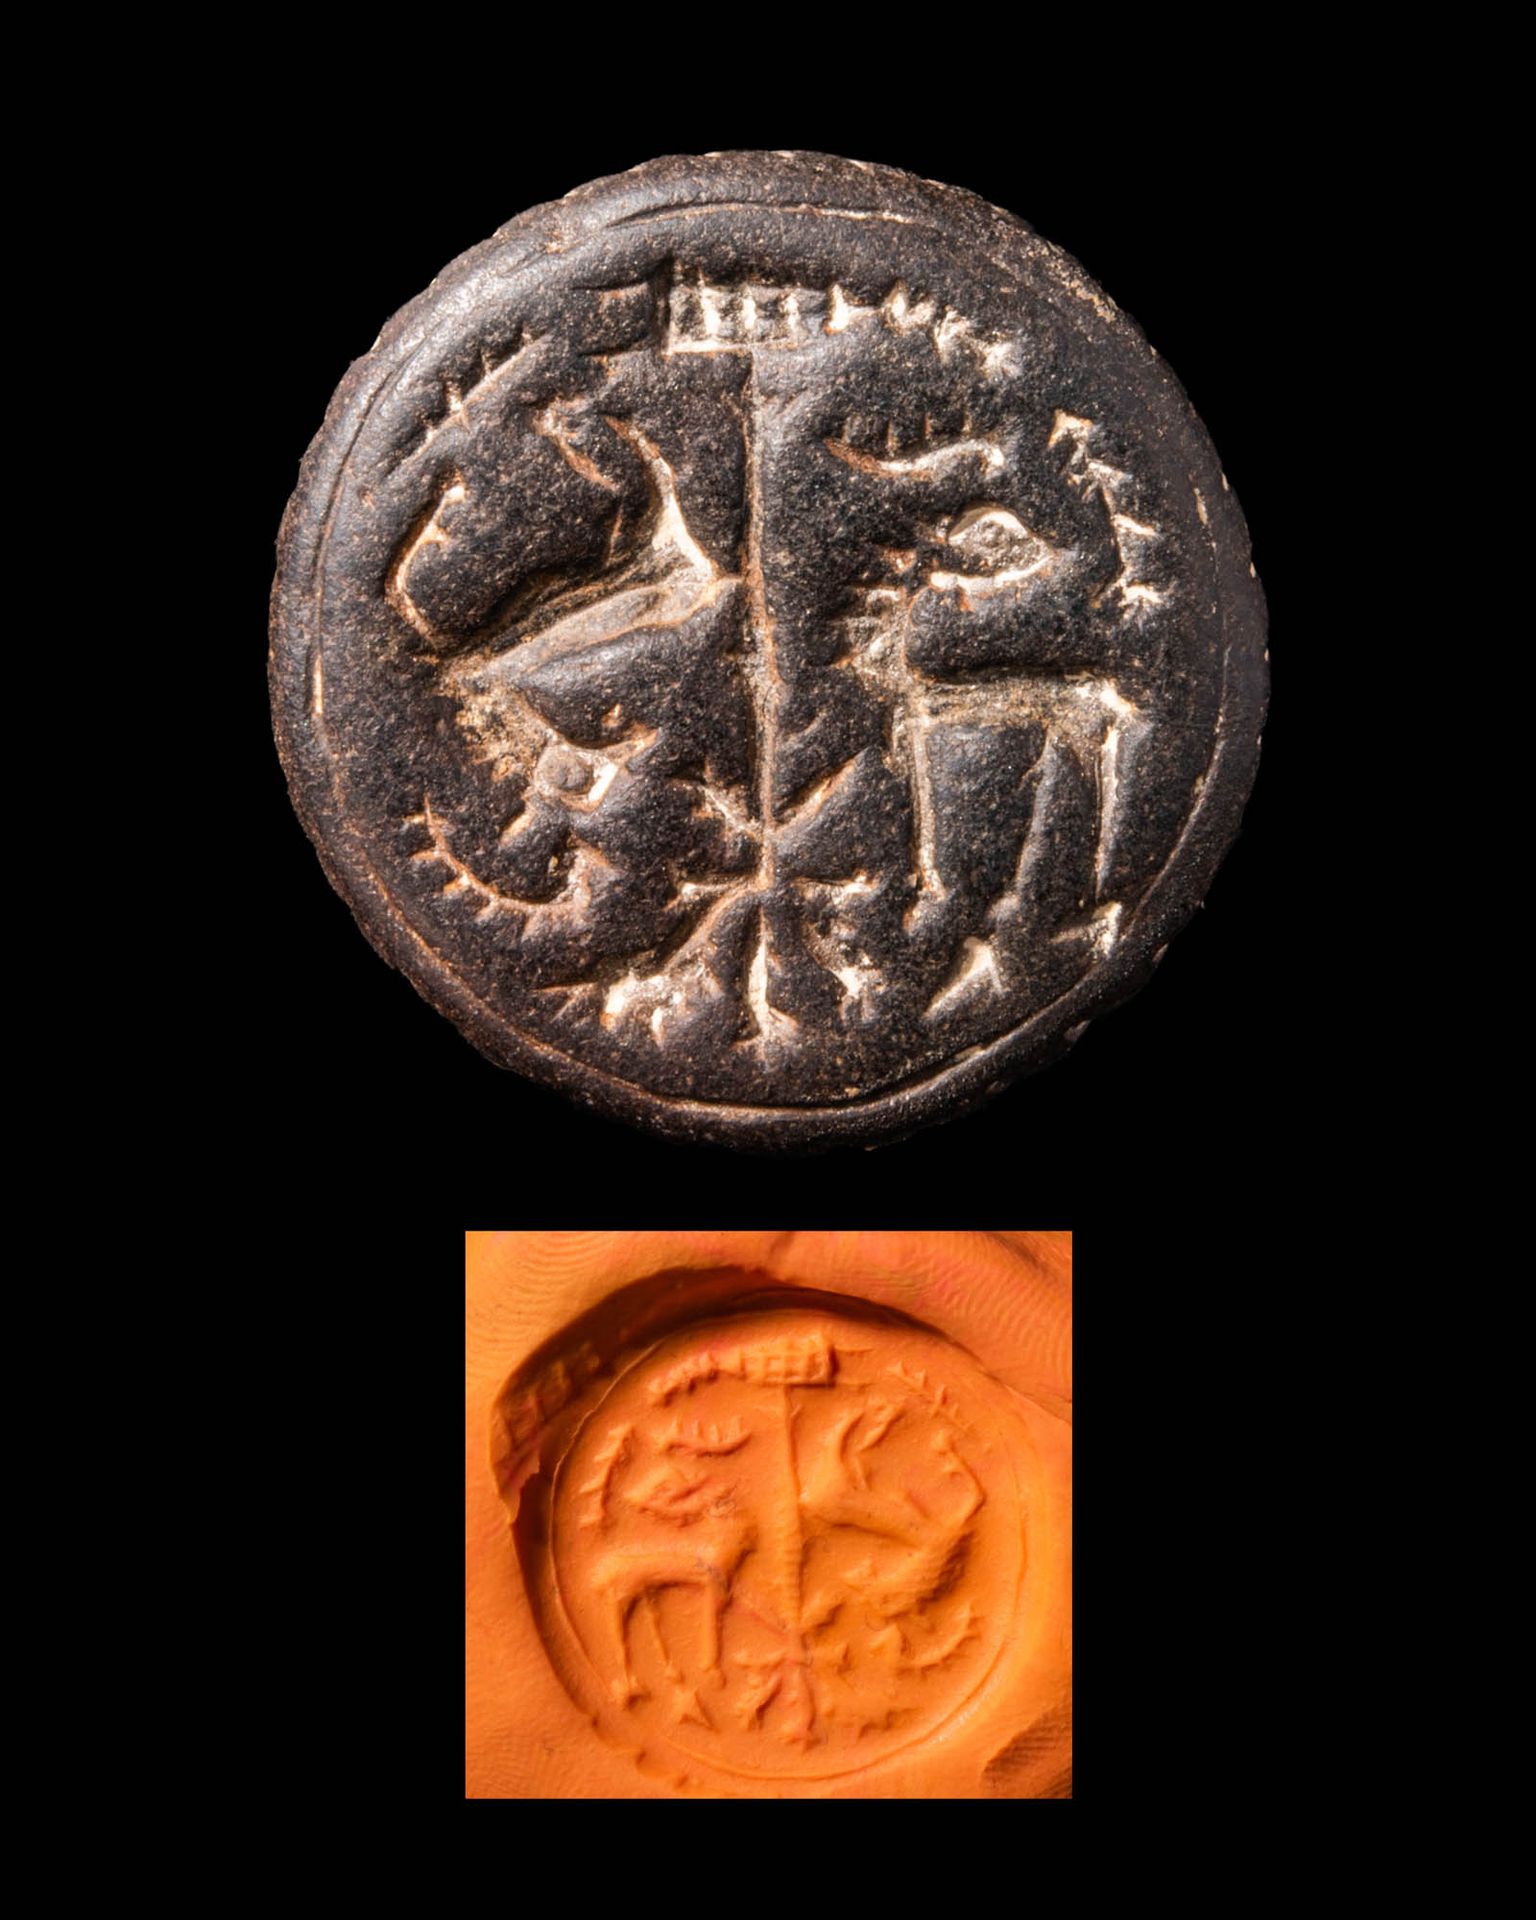 BACTRIAN STAMP SEAL Ca. 2300 - 1800 BC.
A round Bactrian stamp seal depicting tw&hellip;